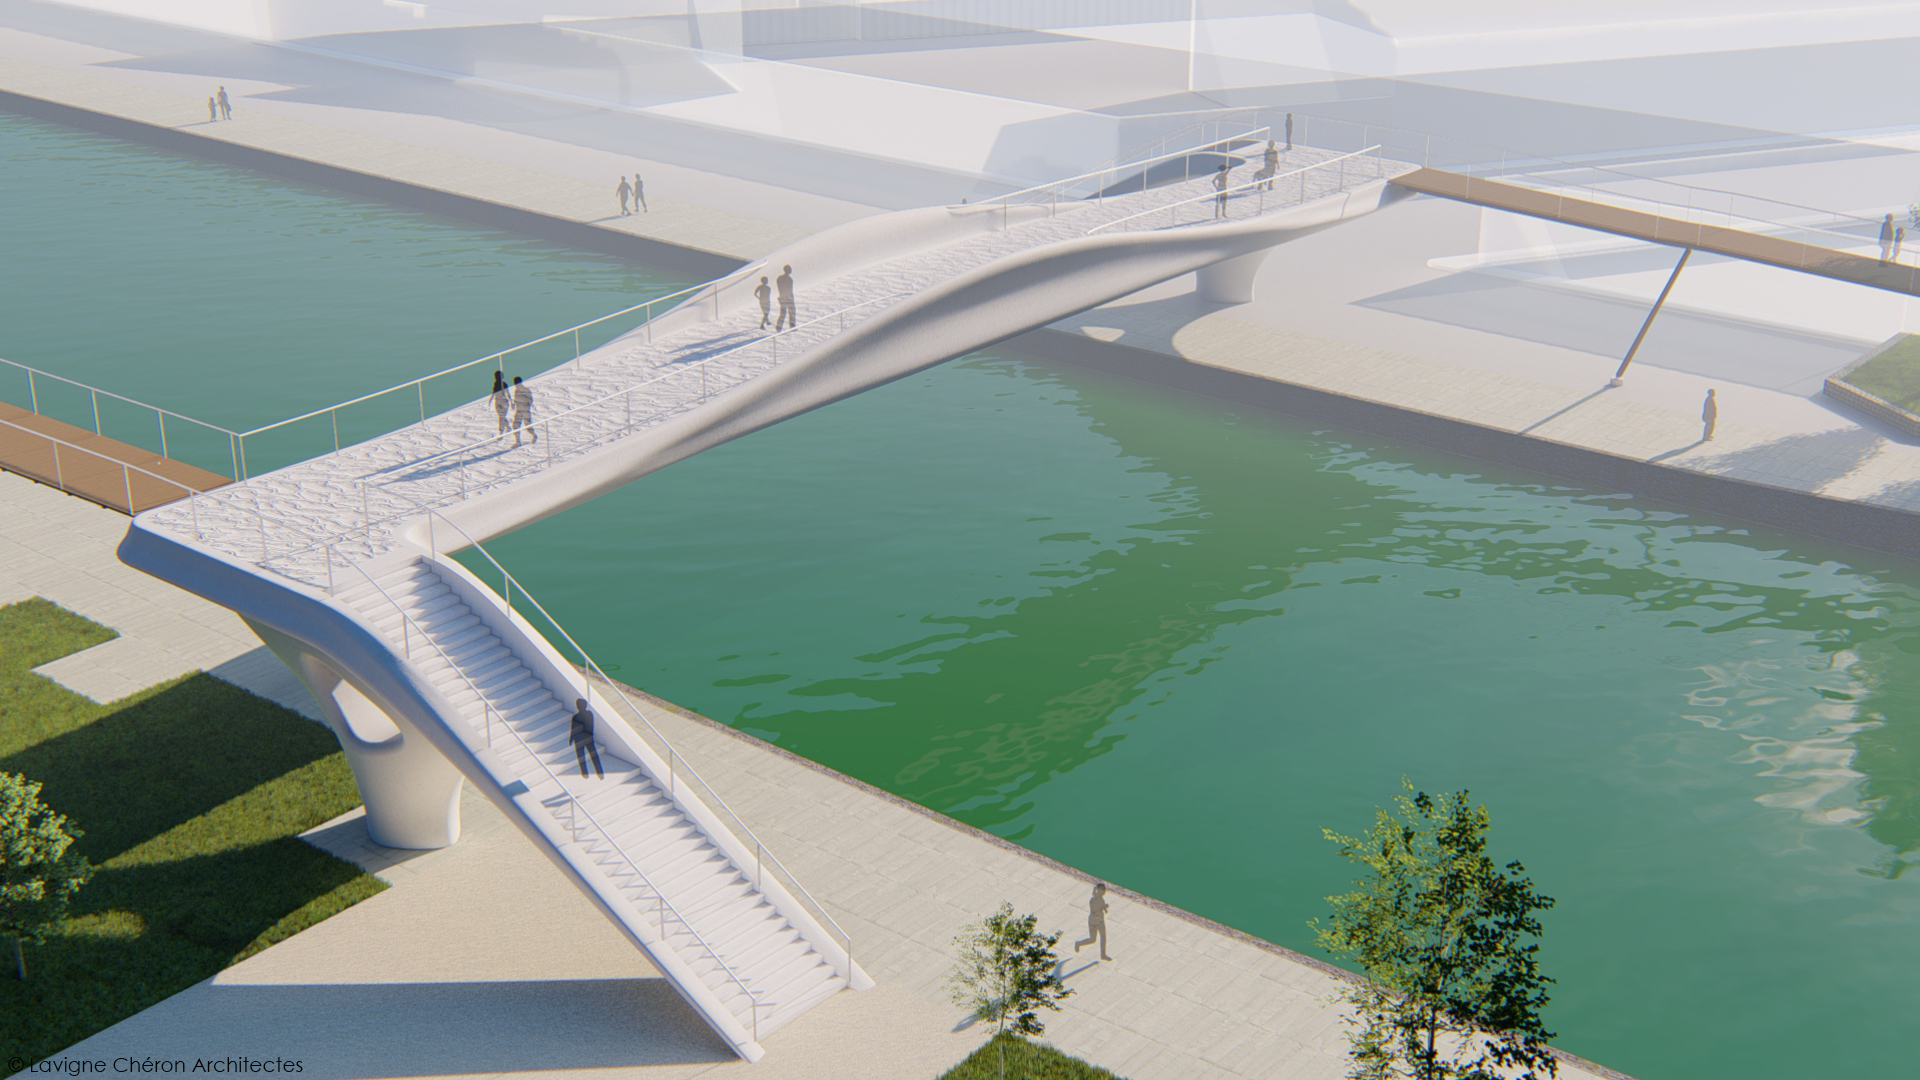 The deck of the footbridge will be completely constructed from 3D printed concrete. Image via XtreeE.